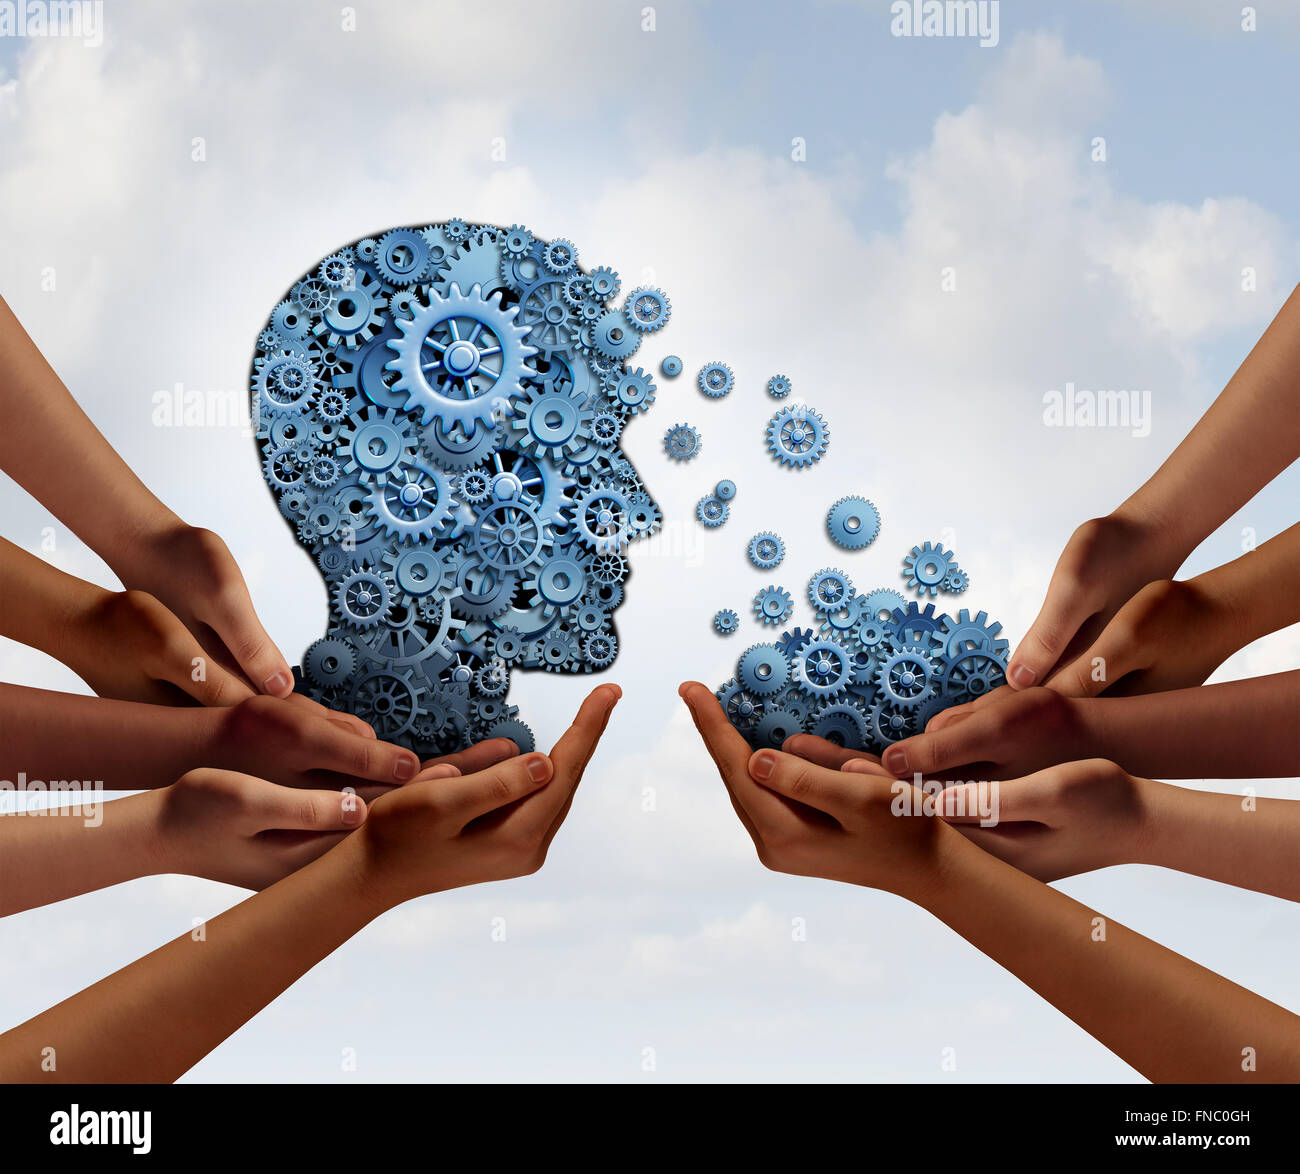 Group training and skill development business education concept with many diverse hands holding a bunch of gears transferring the wheels to a human head made of cogs as a symbol of acquiring the tools for team learning. Stock Photo